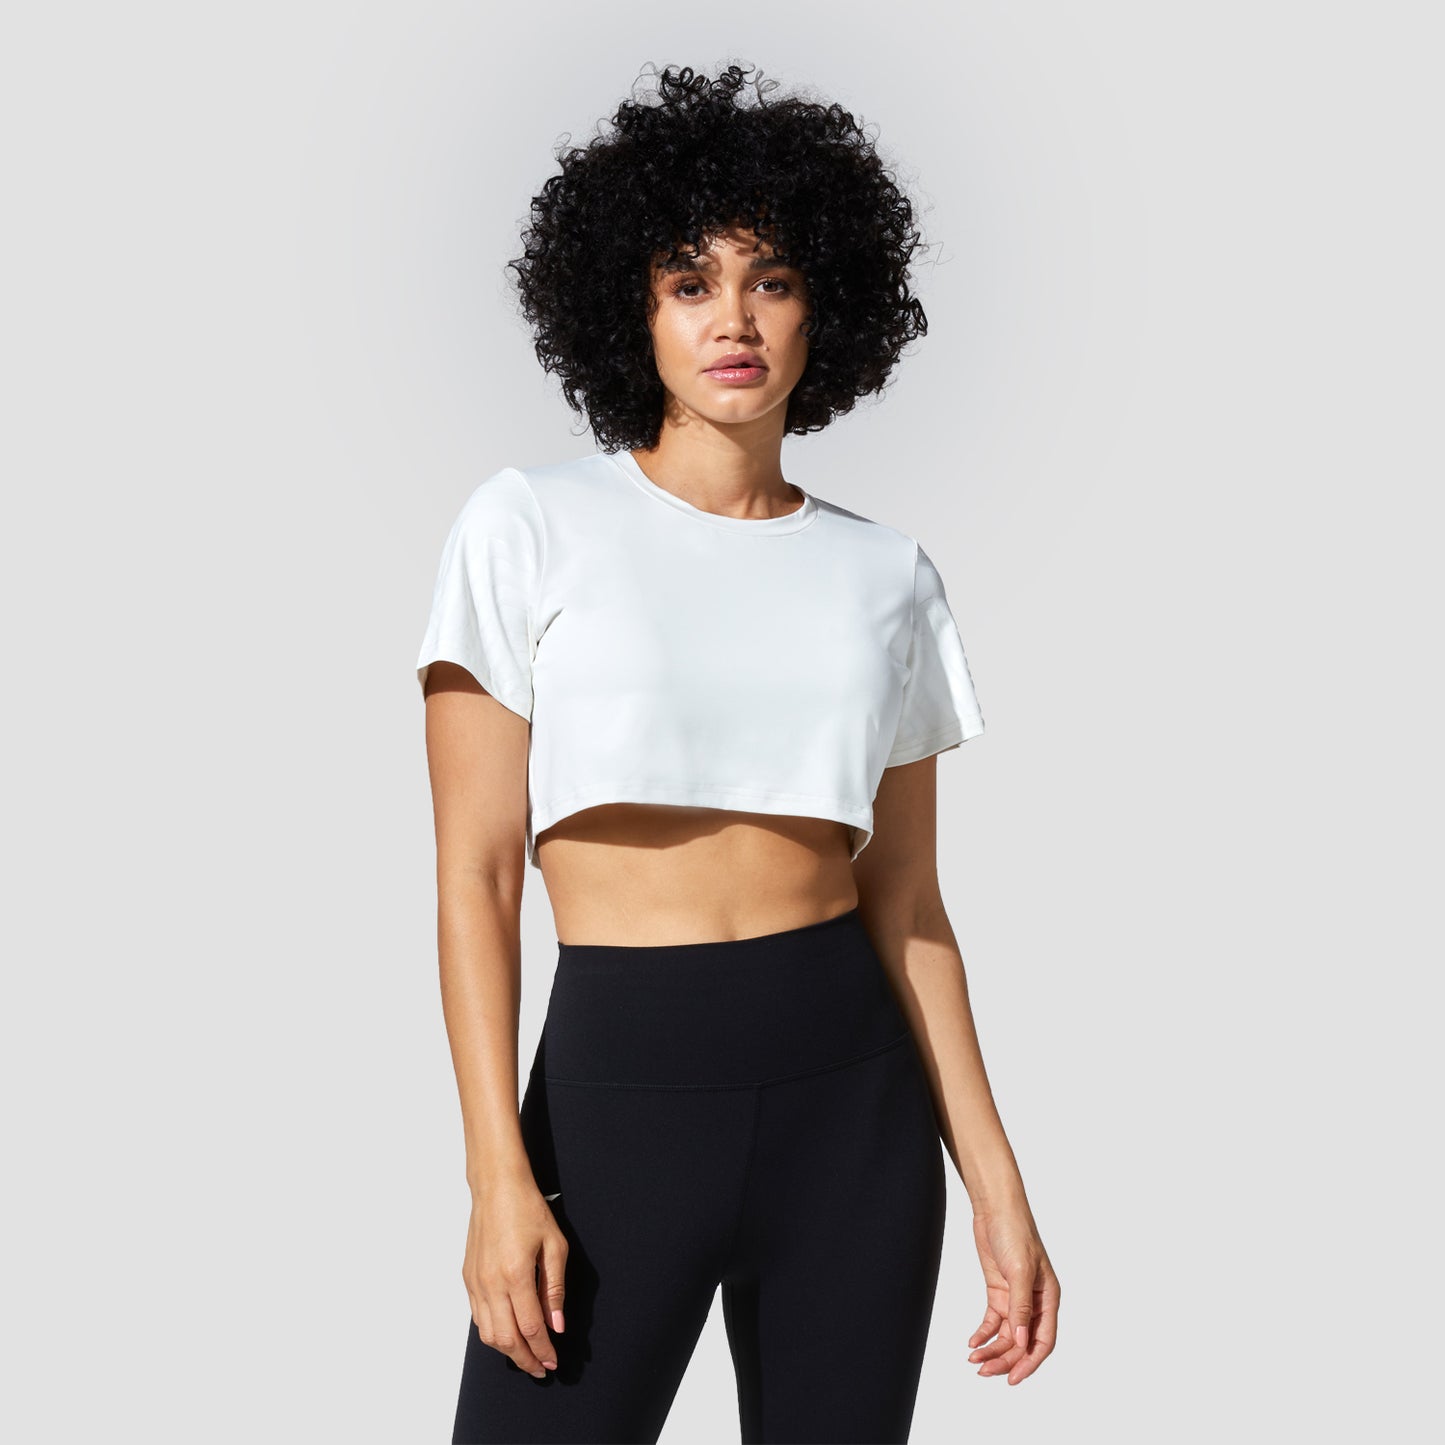 squatwolf-gym-wear-graphic-wave-eyes-crop-top-white-workout-shirts